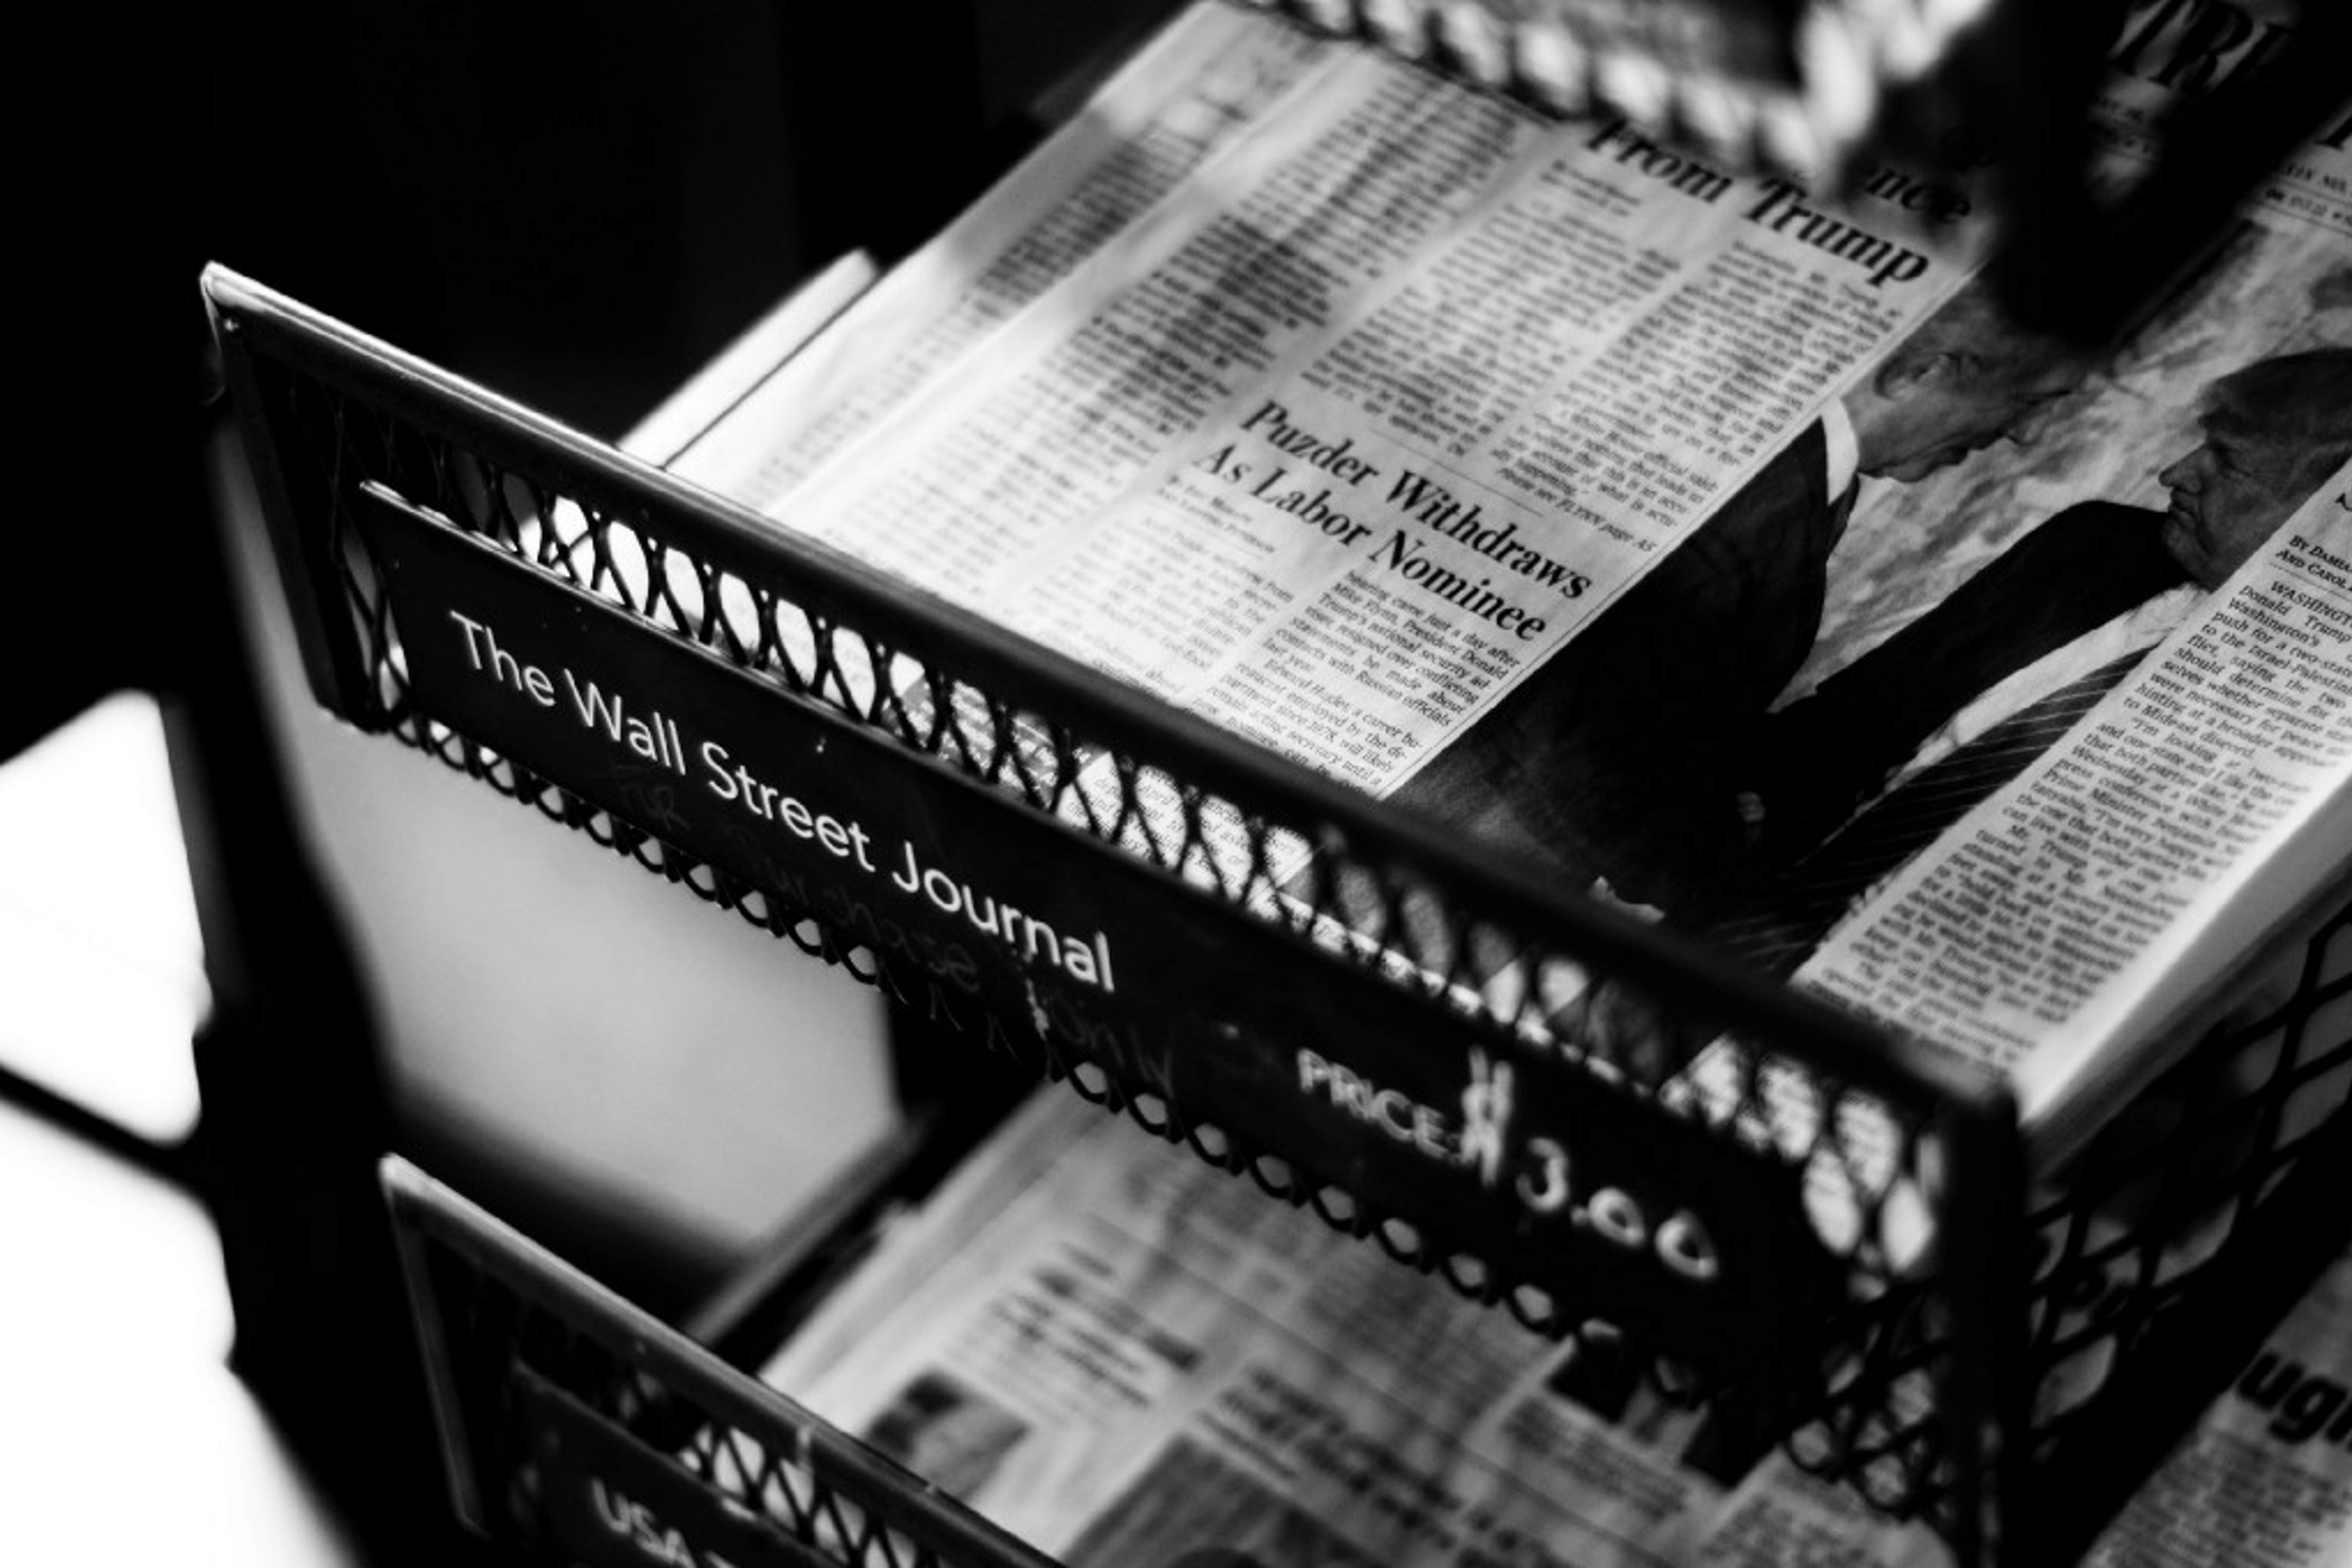 Newspapers in a newsstand